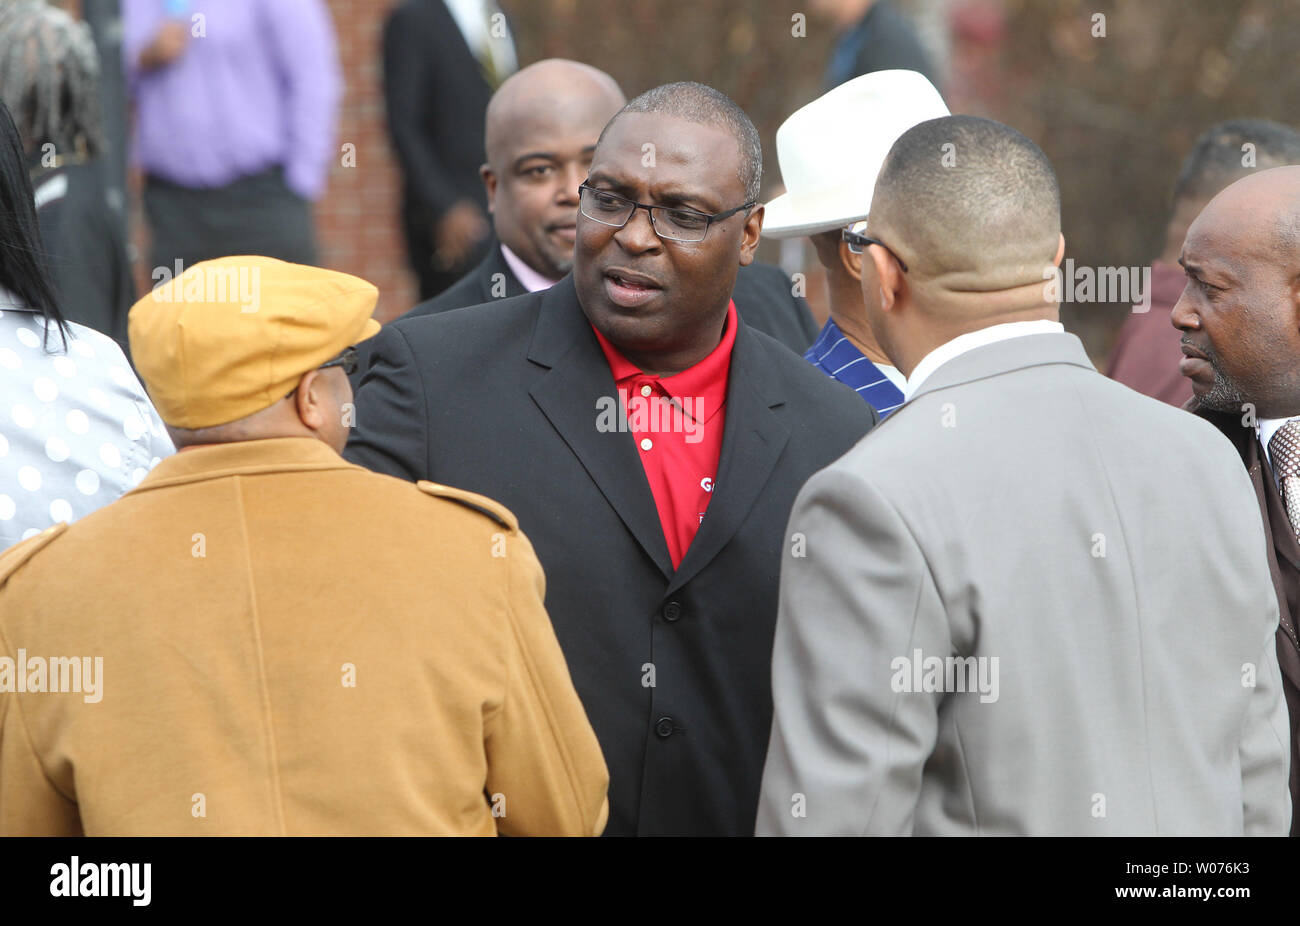 Former NFL defensive back Demetrious Johnson talks with mourners following the funeral of Jerry Brown, at the Hopewell Missionary Baptist Church in St. Louis on December 15, 2012. The Dallas CowboysÕ practice squad nose tackle was killed in an Irving car accident on December 8, 2012 when his best friend and teammate Josh Brent hit a curb, flipping the vehicle.    UPI/Bill Greenblatt Stock Photo